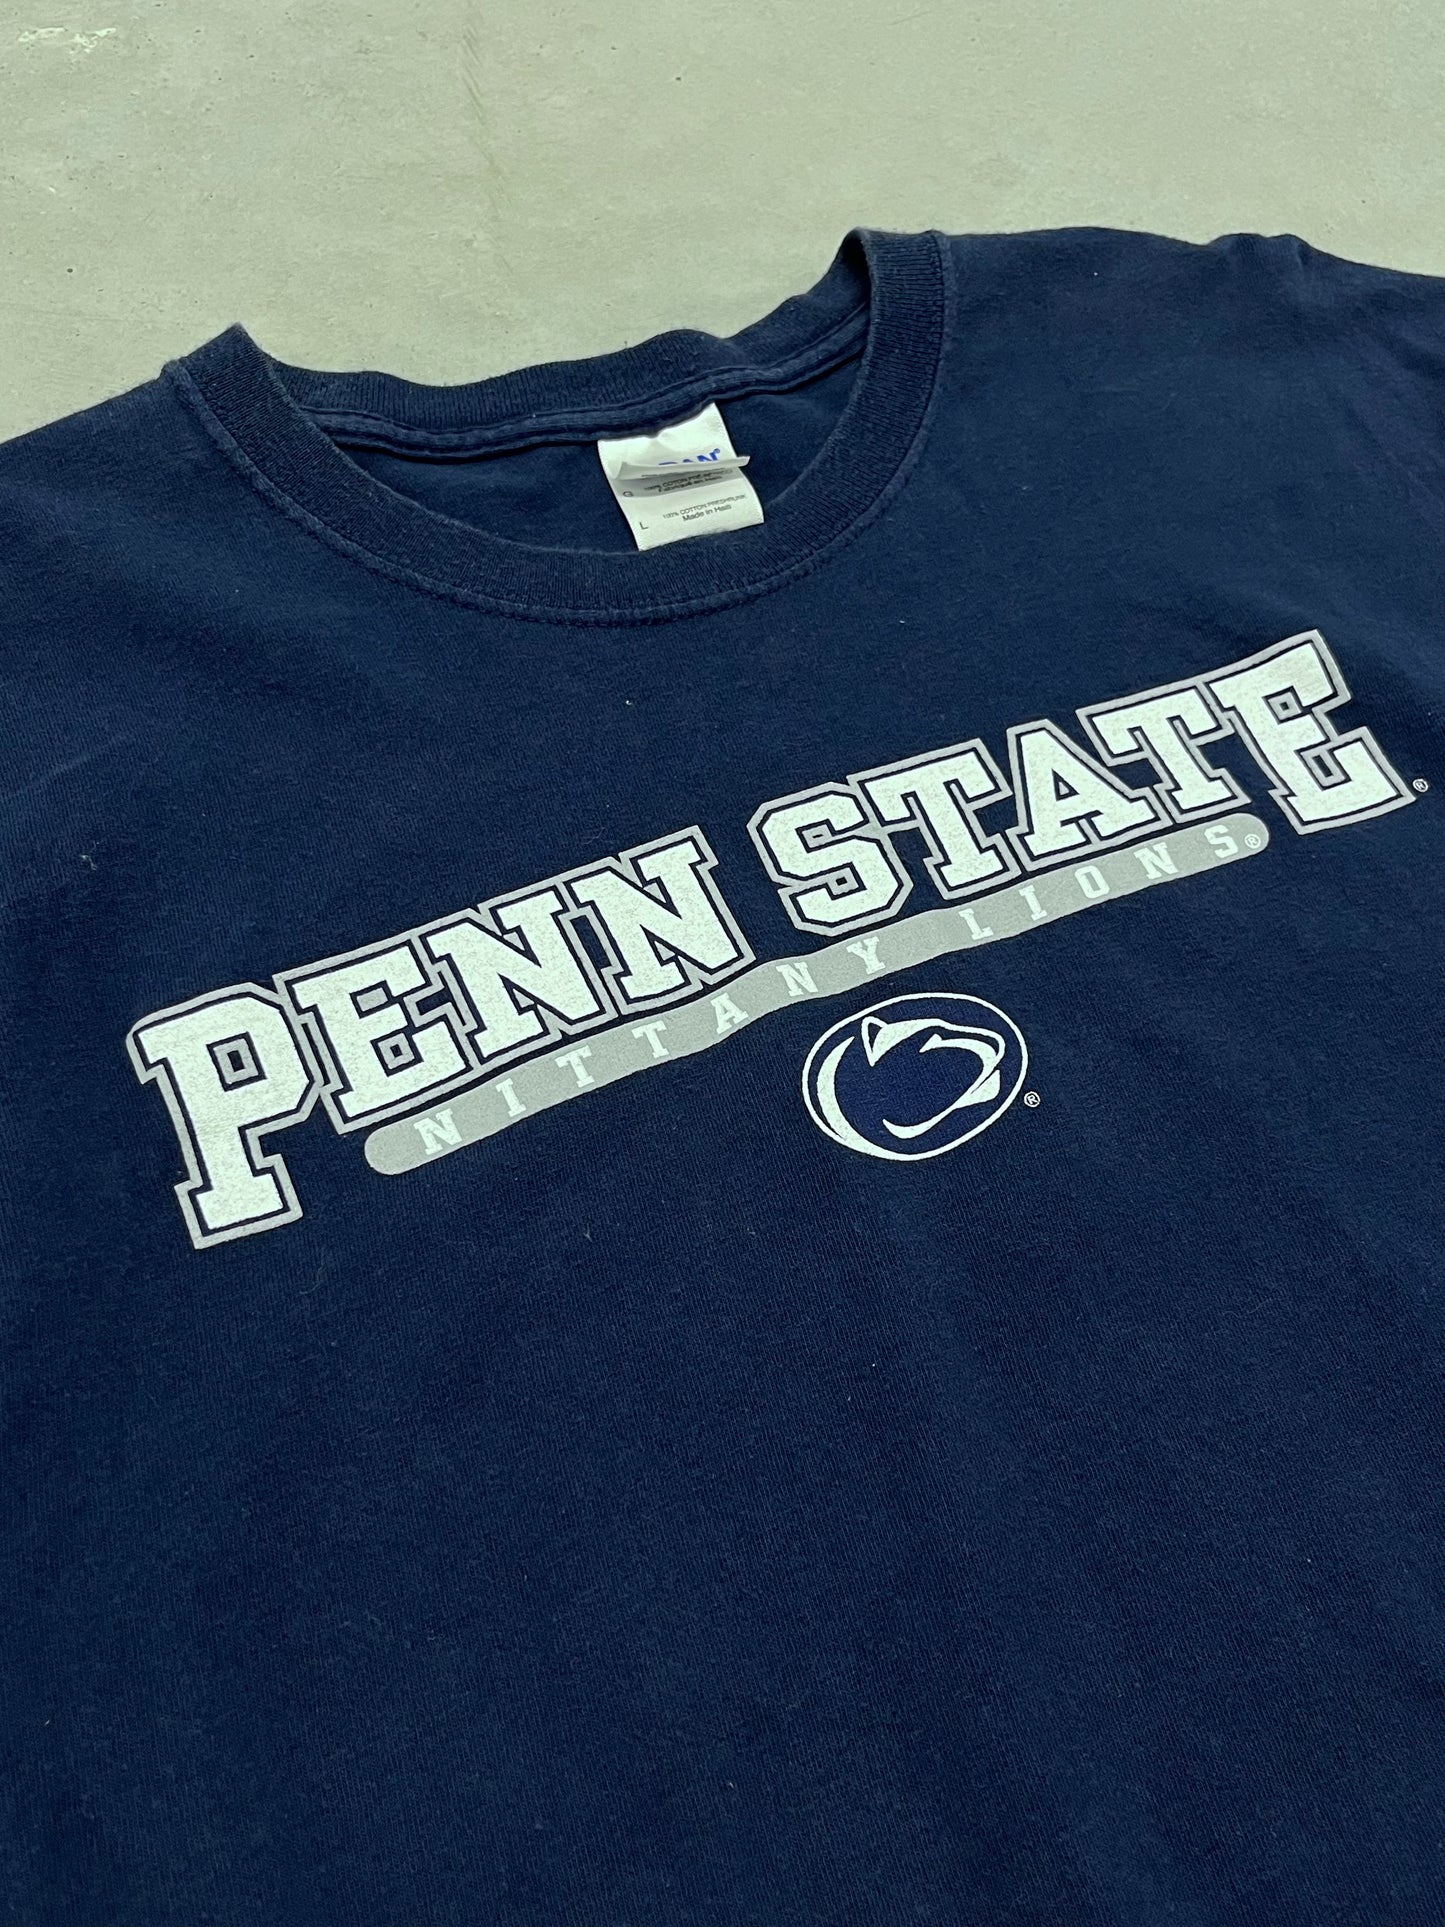 Penn State Nittany Lions Tee